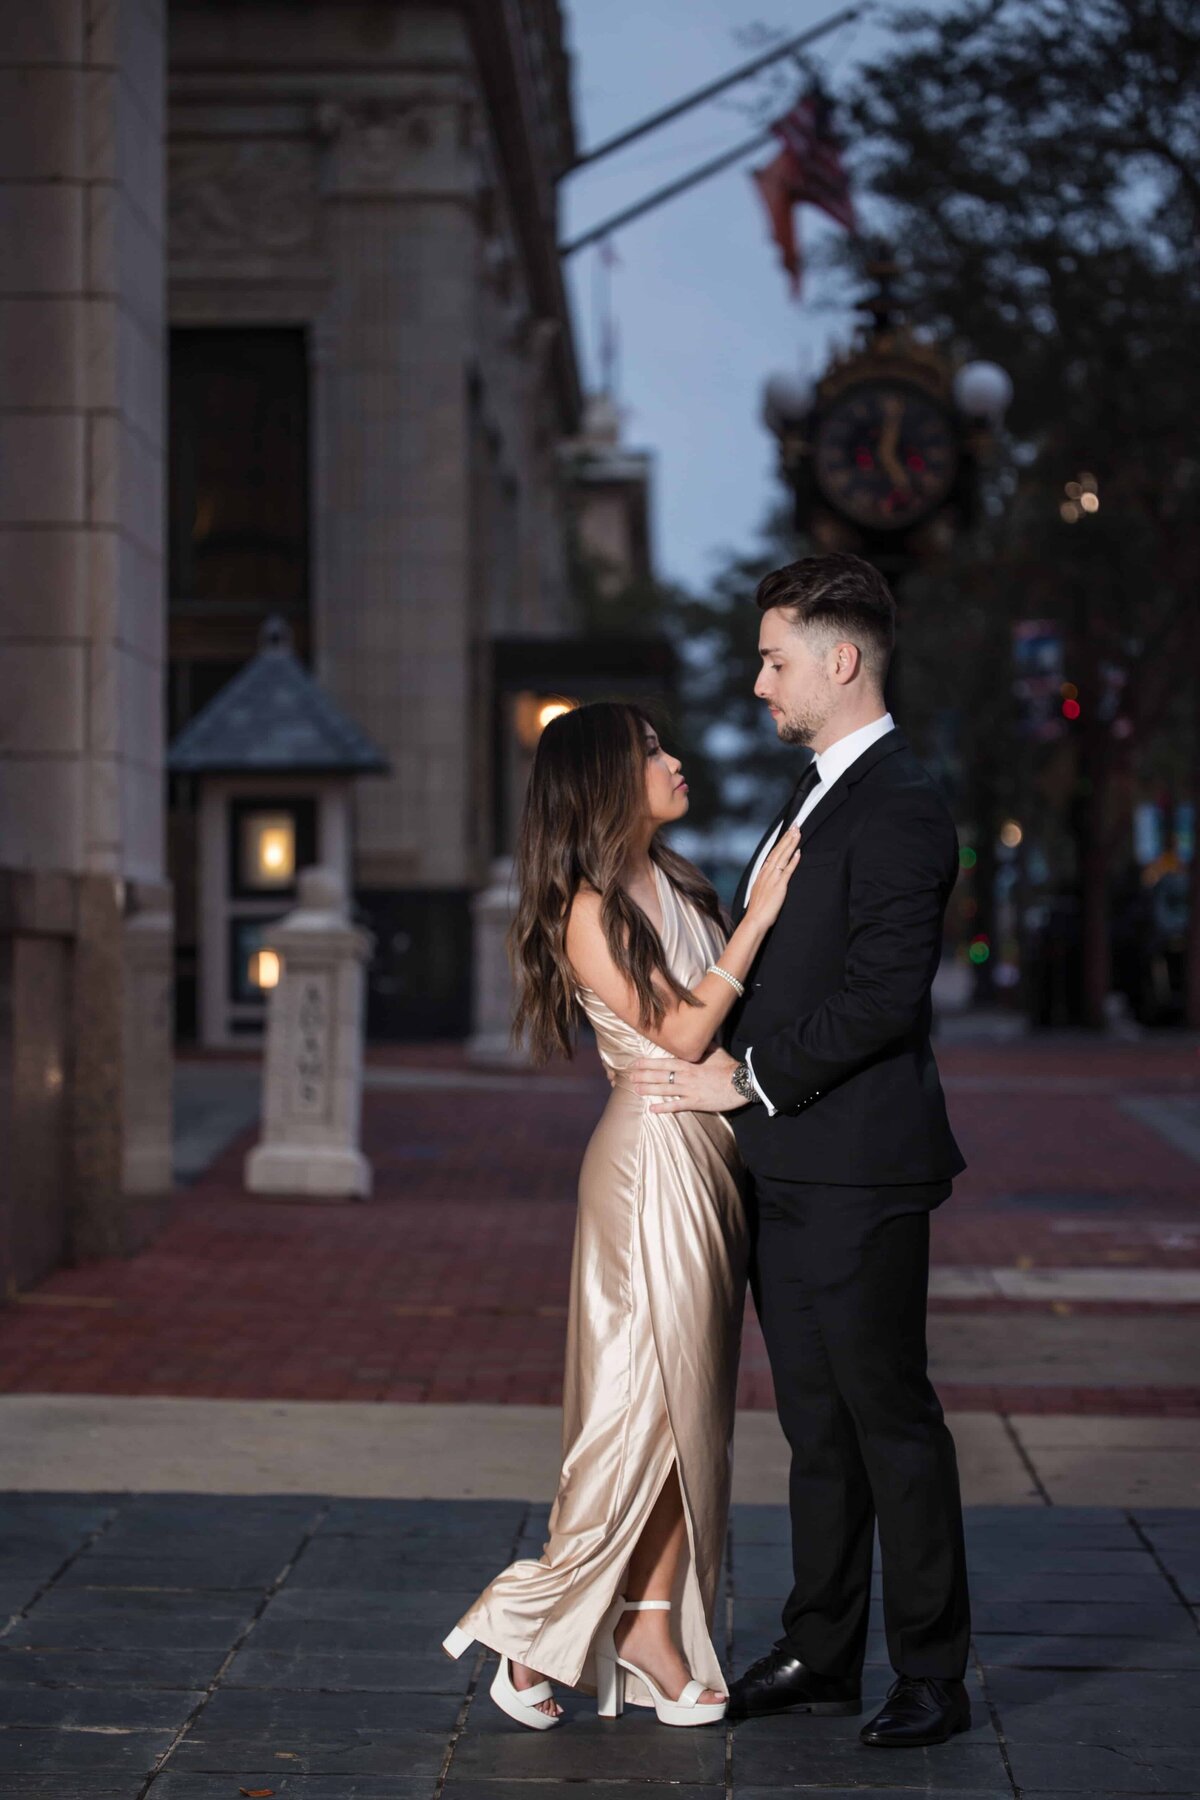 Downtown Engagement Session | Jacksonville Engagement Photos | Professional Engagement Photographers in Jacksonville - Phavy Photography